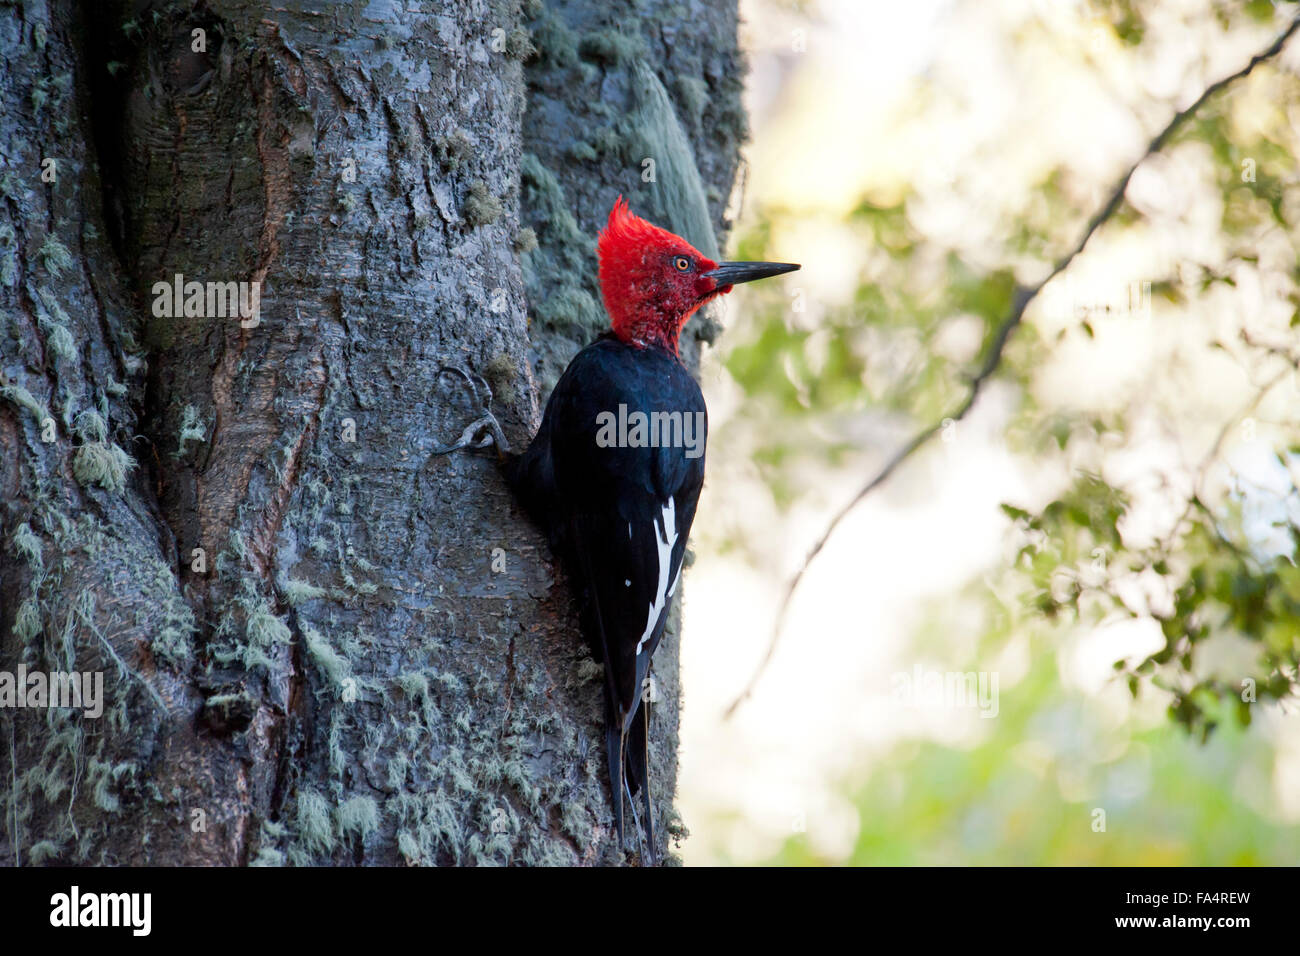 Male Magellanic woodpecker (Campephilus magellanicus), on tree showing red head & crest, Argentina, South America Stock Photo